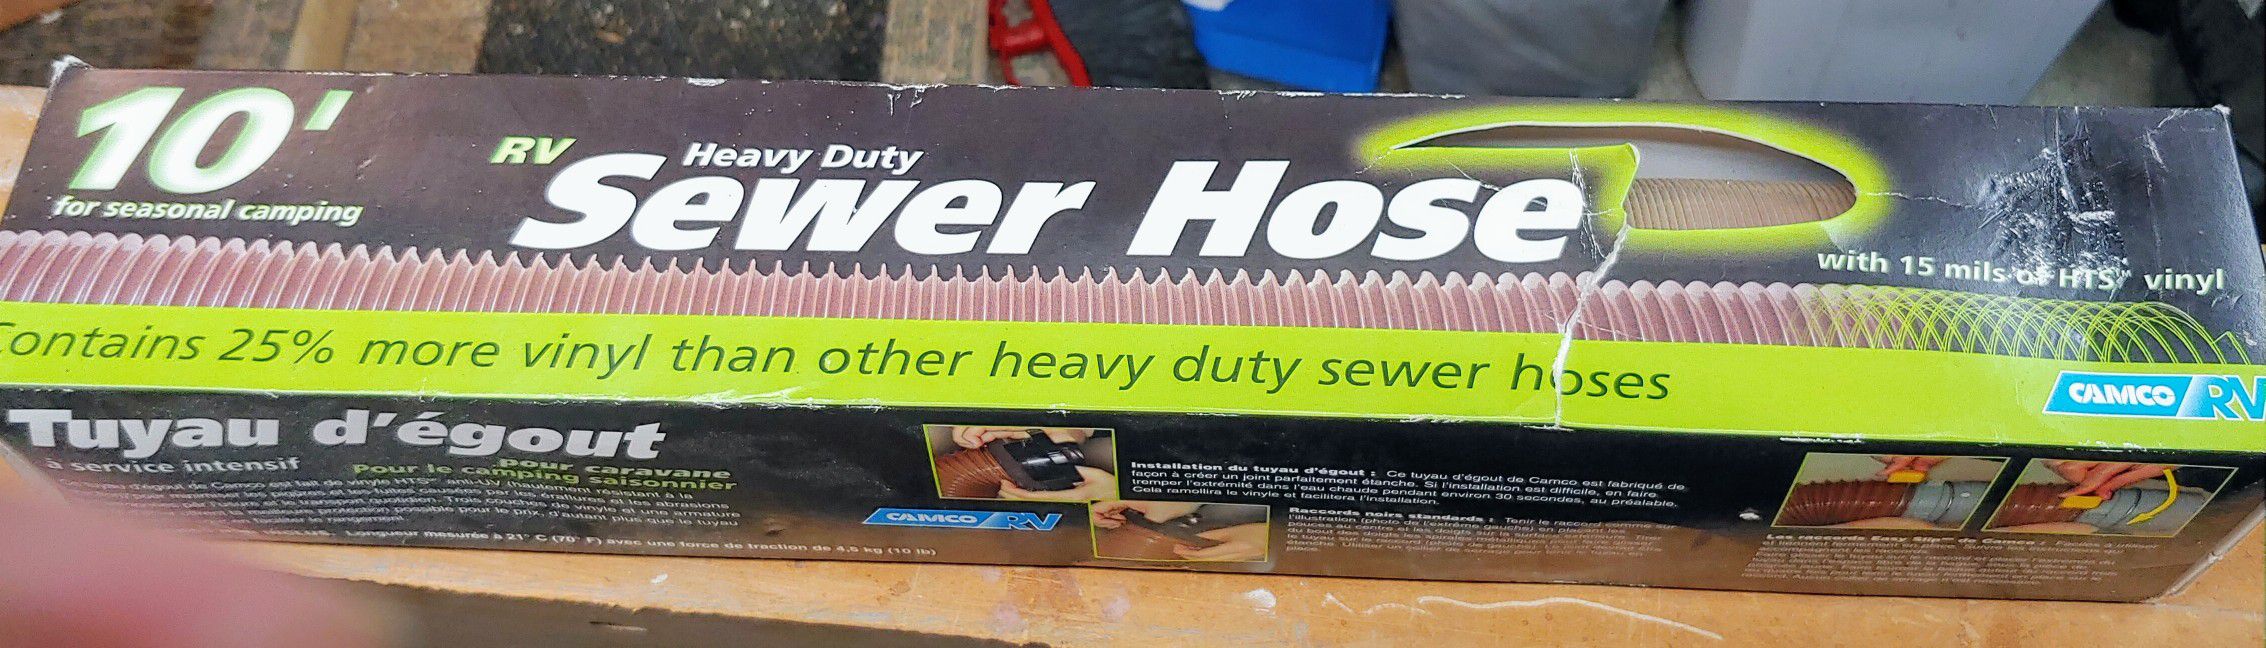 NOW ONLY $10! New CAMCO 10' Heavy Duty RV Sewer Hose